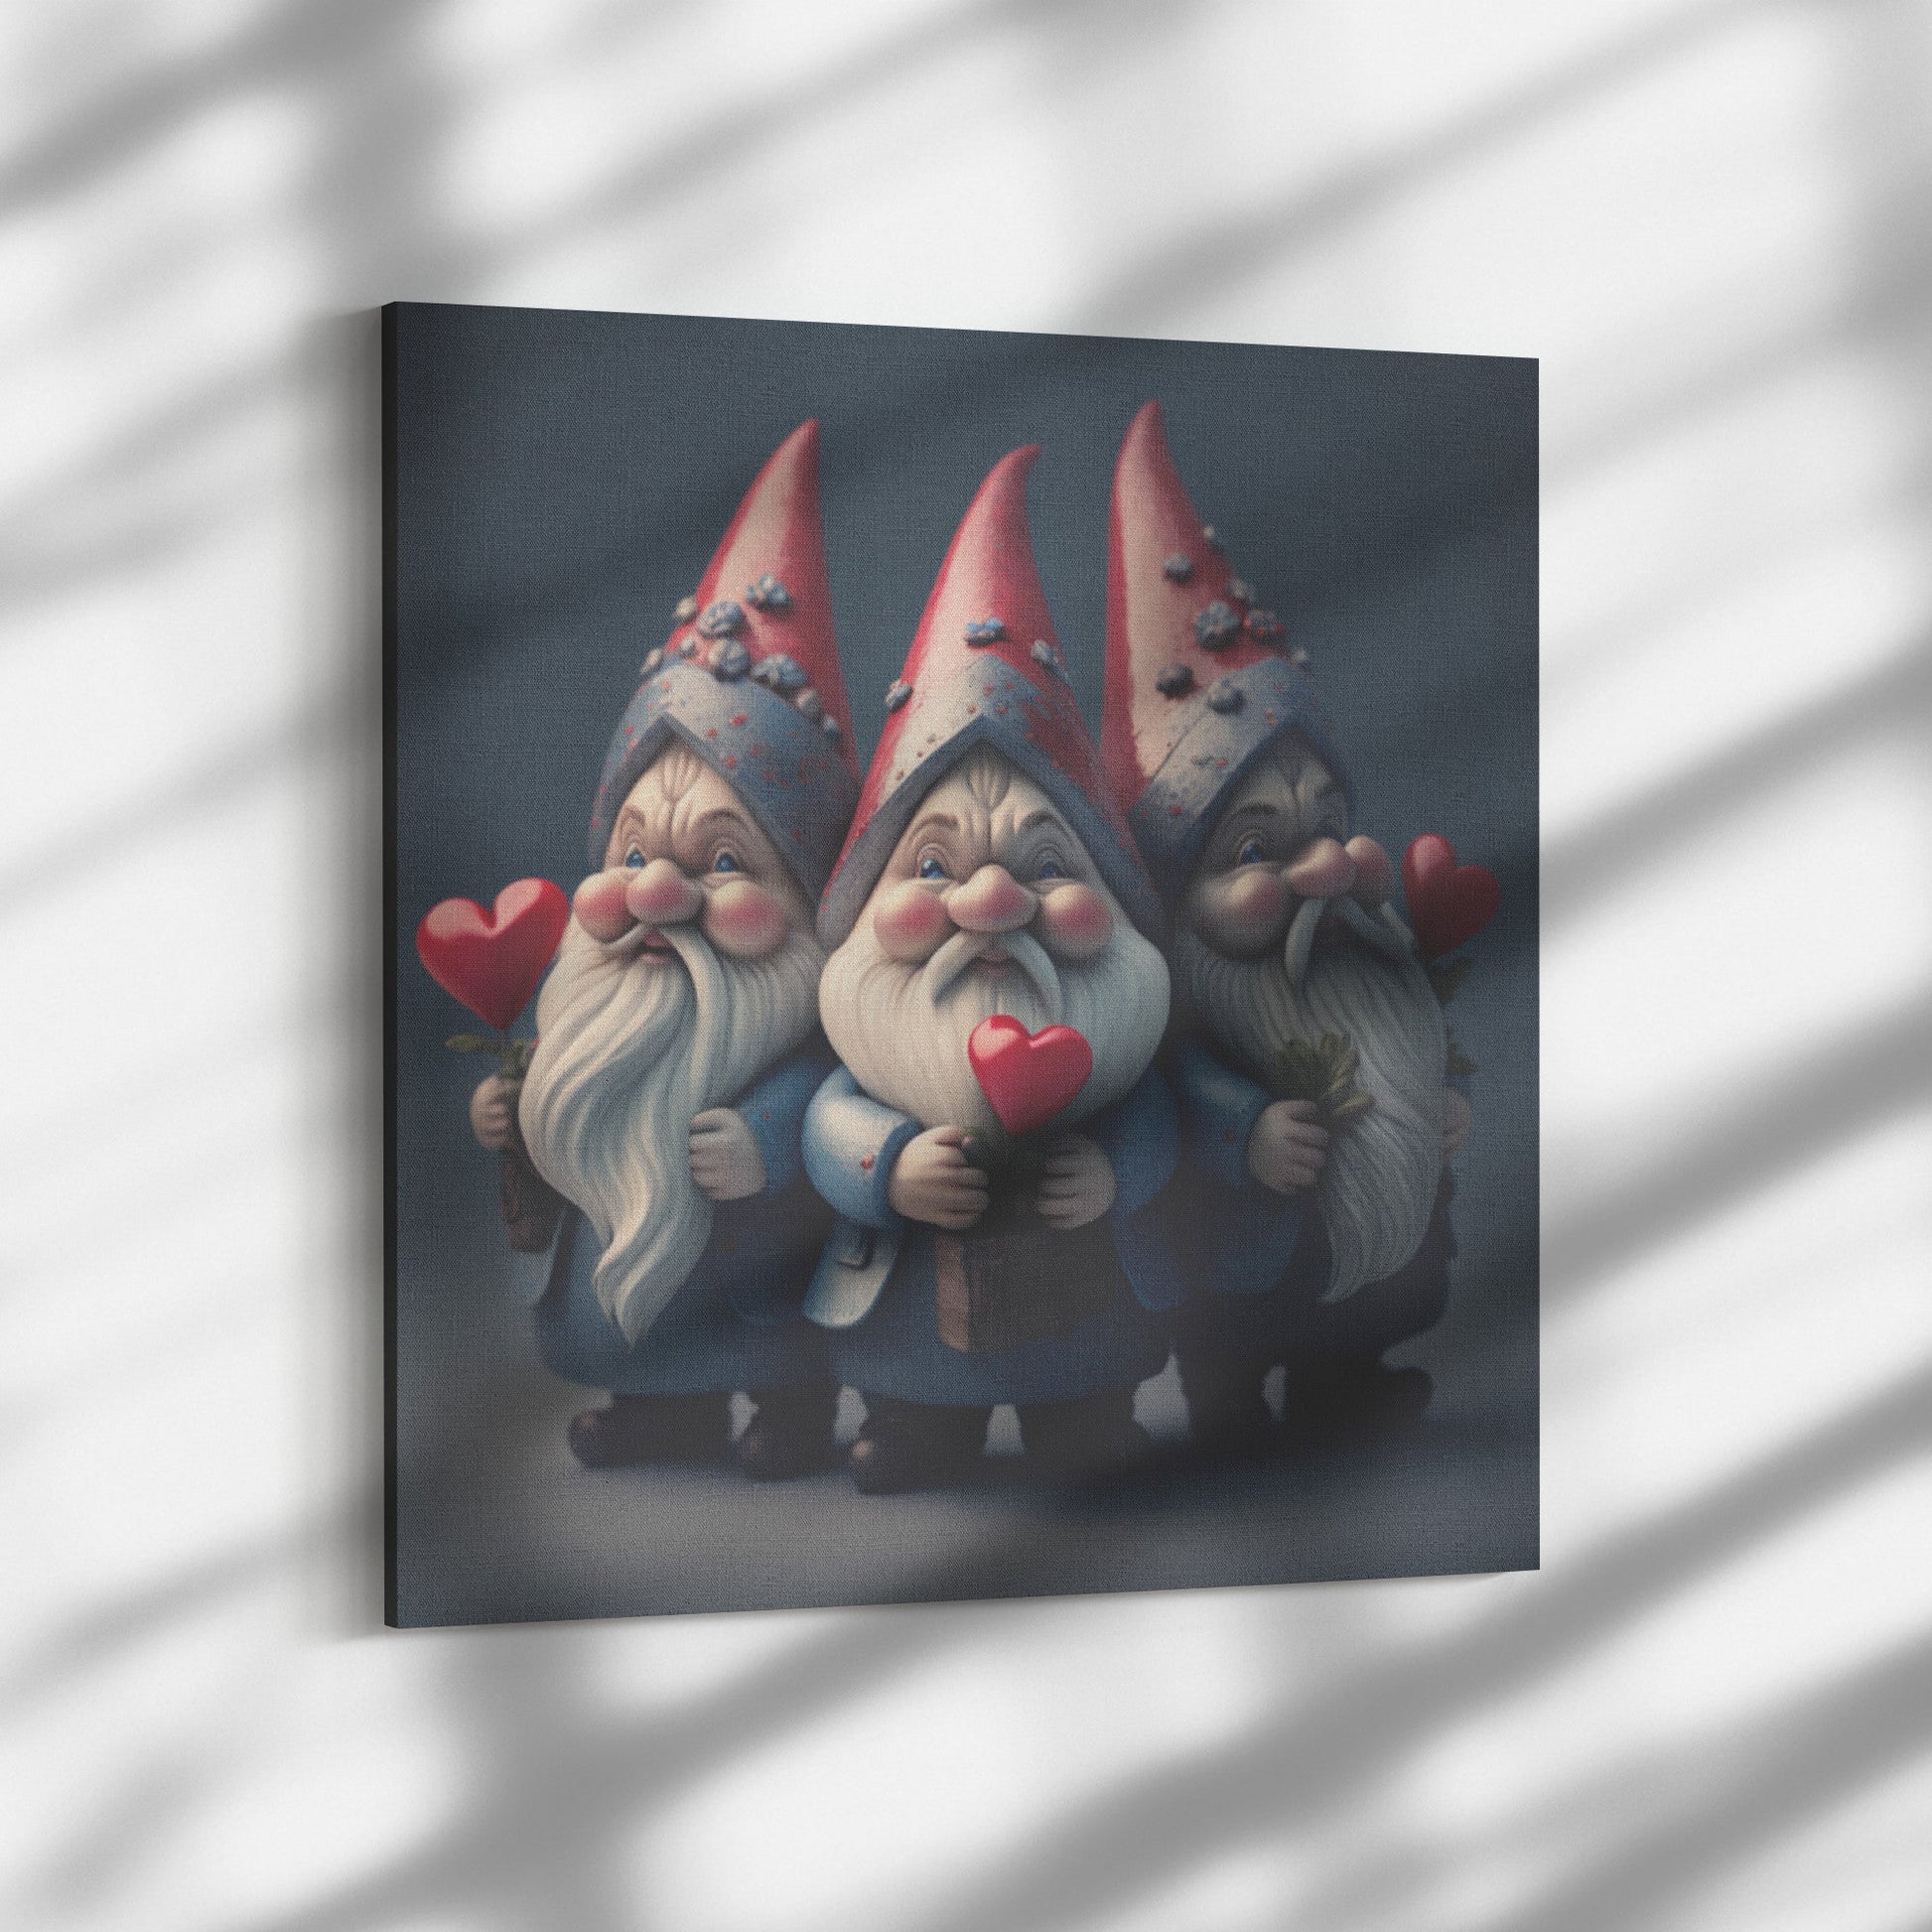 Wall Art - Valentine's Day Wall Art Canvas 3 Gnomes Are Holding Your Heart Super Realistic Image In High Definition